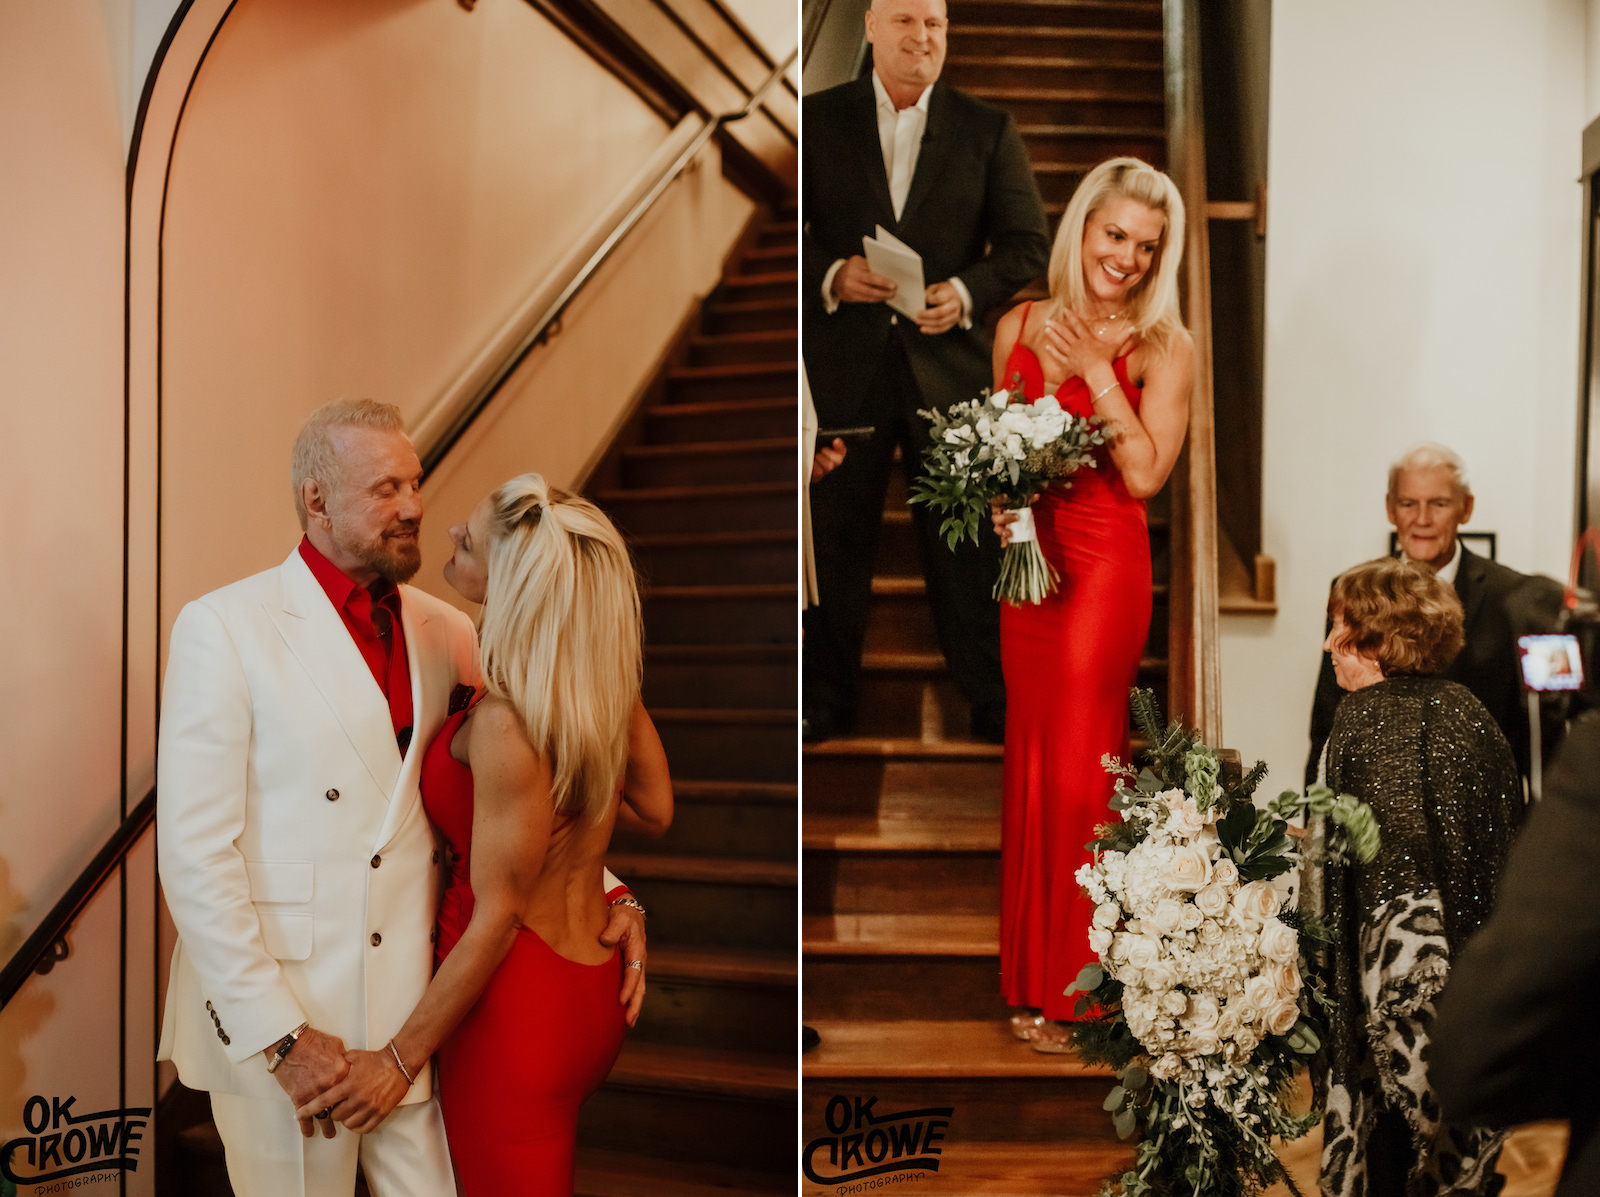 Diamond Dallas Page and Payge McMahon's wedding photos at The Dwell Hotel in downtown Chattanooga